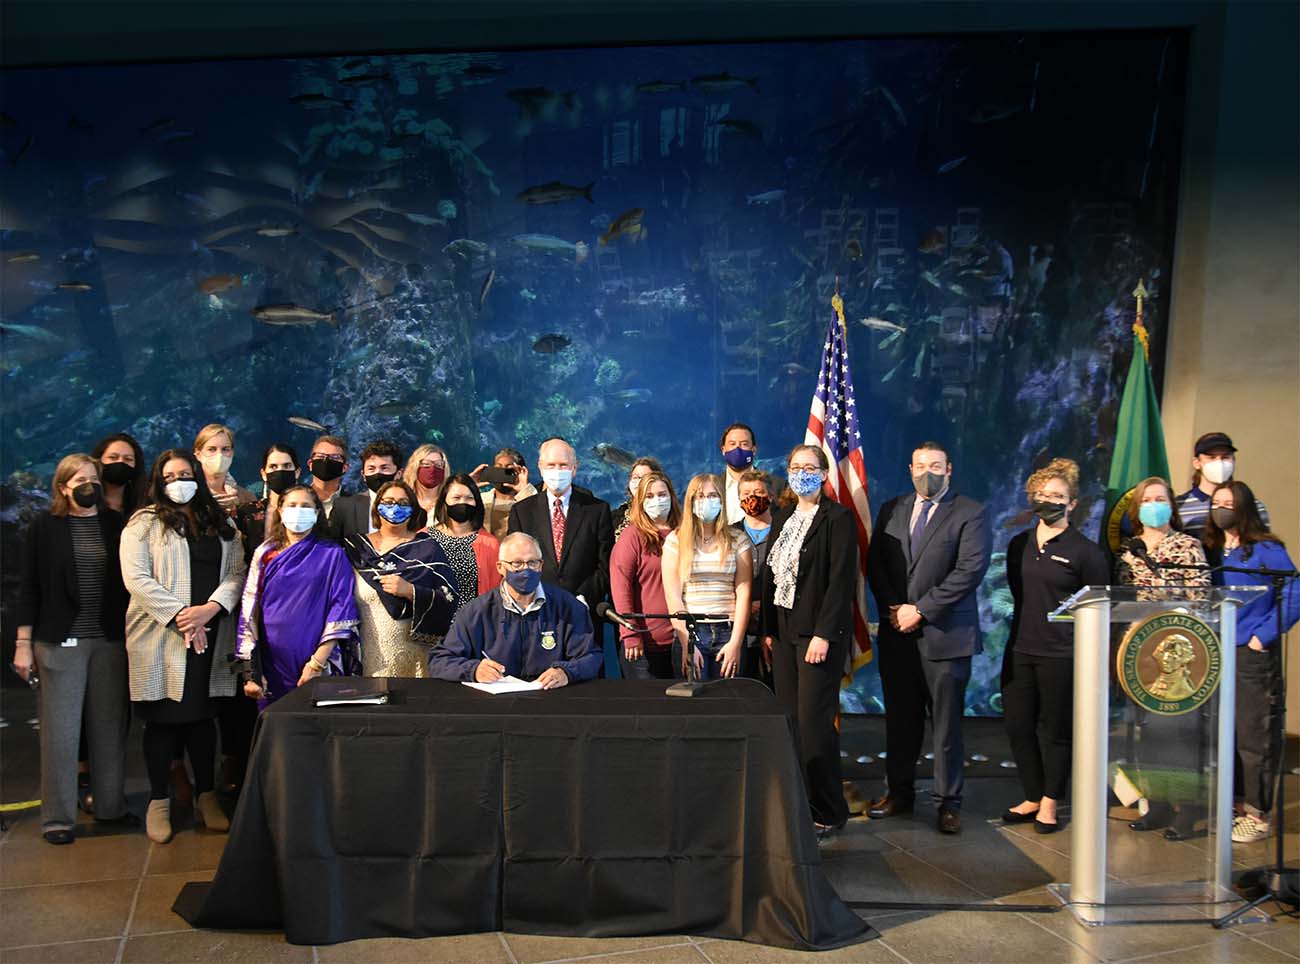 May 17, 2021: Governor Jay Inslee came to the Seattle Aquarium to sign a new law (SB5022) that will reduce plastic pollution and improve recycling in Washington.